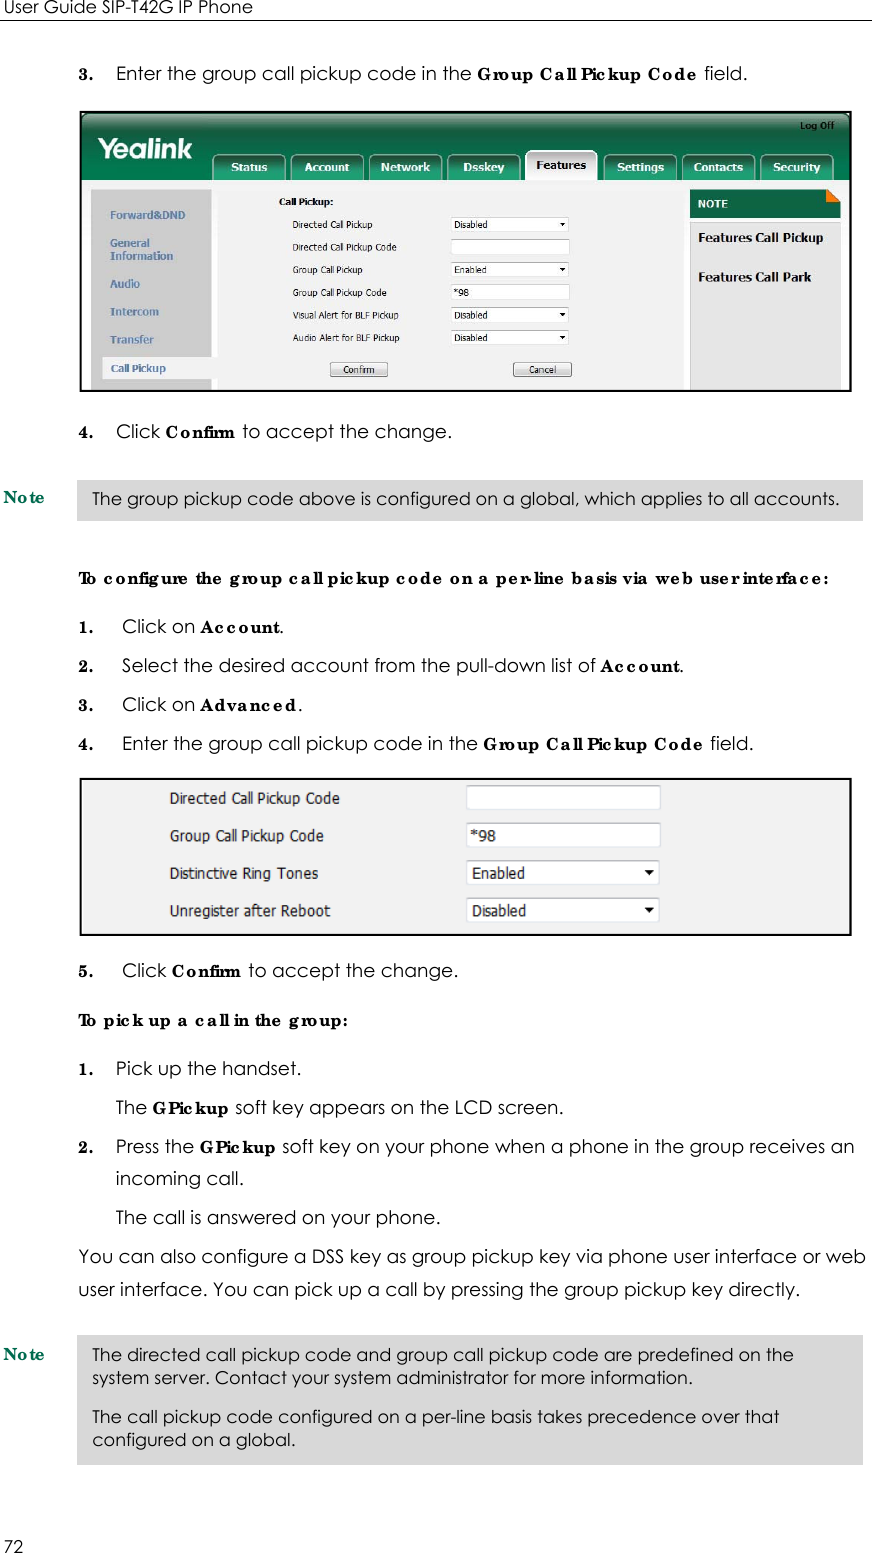 User Guide SIP-T42G IP Phone 72 3. Enter the group call pickup code in the Group Call Pickup Code field.  4. Click Confirm to accept the change. Note To configure the group call pickup code on a per-line basis via web user interface: 1. Click on Account. 2. Select the desired account from the pull-down list of Account. 3. Click on Advanced. 4. Enter the group call pickup code in the Group Call Pickup Code field.  5. Click Confirm to accept the change. To pick up a call in the group: 1. Pick up the handset. The GPickup soft key appears on the LCD screen. 2. Press the GPickup soft key on your phone when a phone in the group receives an incoming call. The call is answered on your phone. You can also configure a DSS key as group pickup key via phone user interface or web user interface. You can pick up a call by pressing the group pickup key directly. Note  The directed call pickup code and group call pickup code are predefined on the system server. Contact your system administrator for more information. The call pickup code configured on a per-line basis takes precedence over that configured on a global. The group pickup code above is configured on a global, which applies to all accounts. 